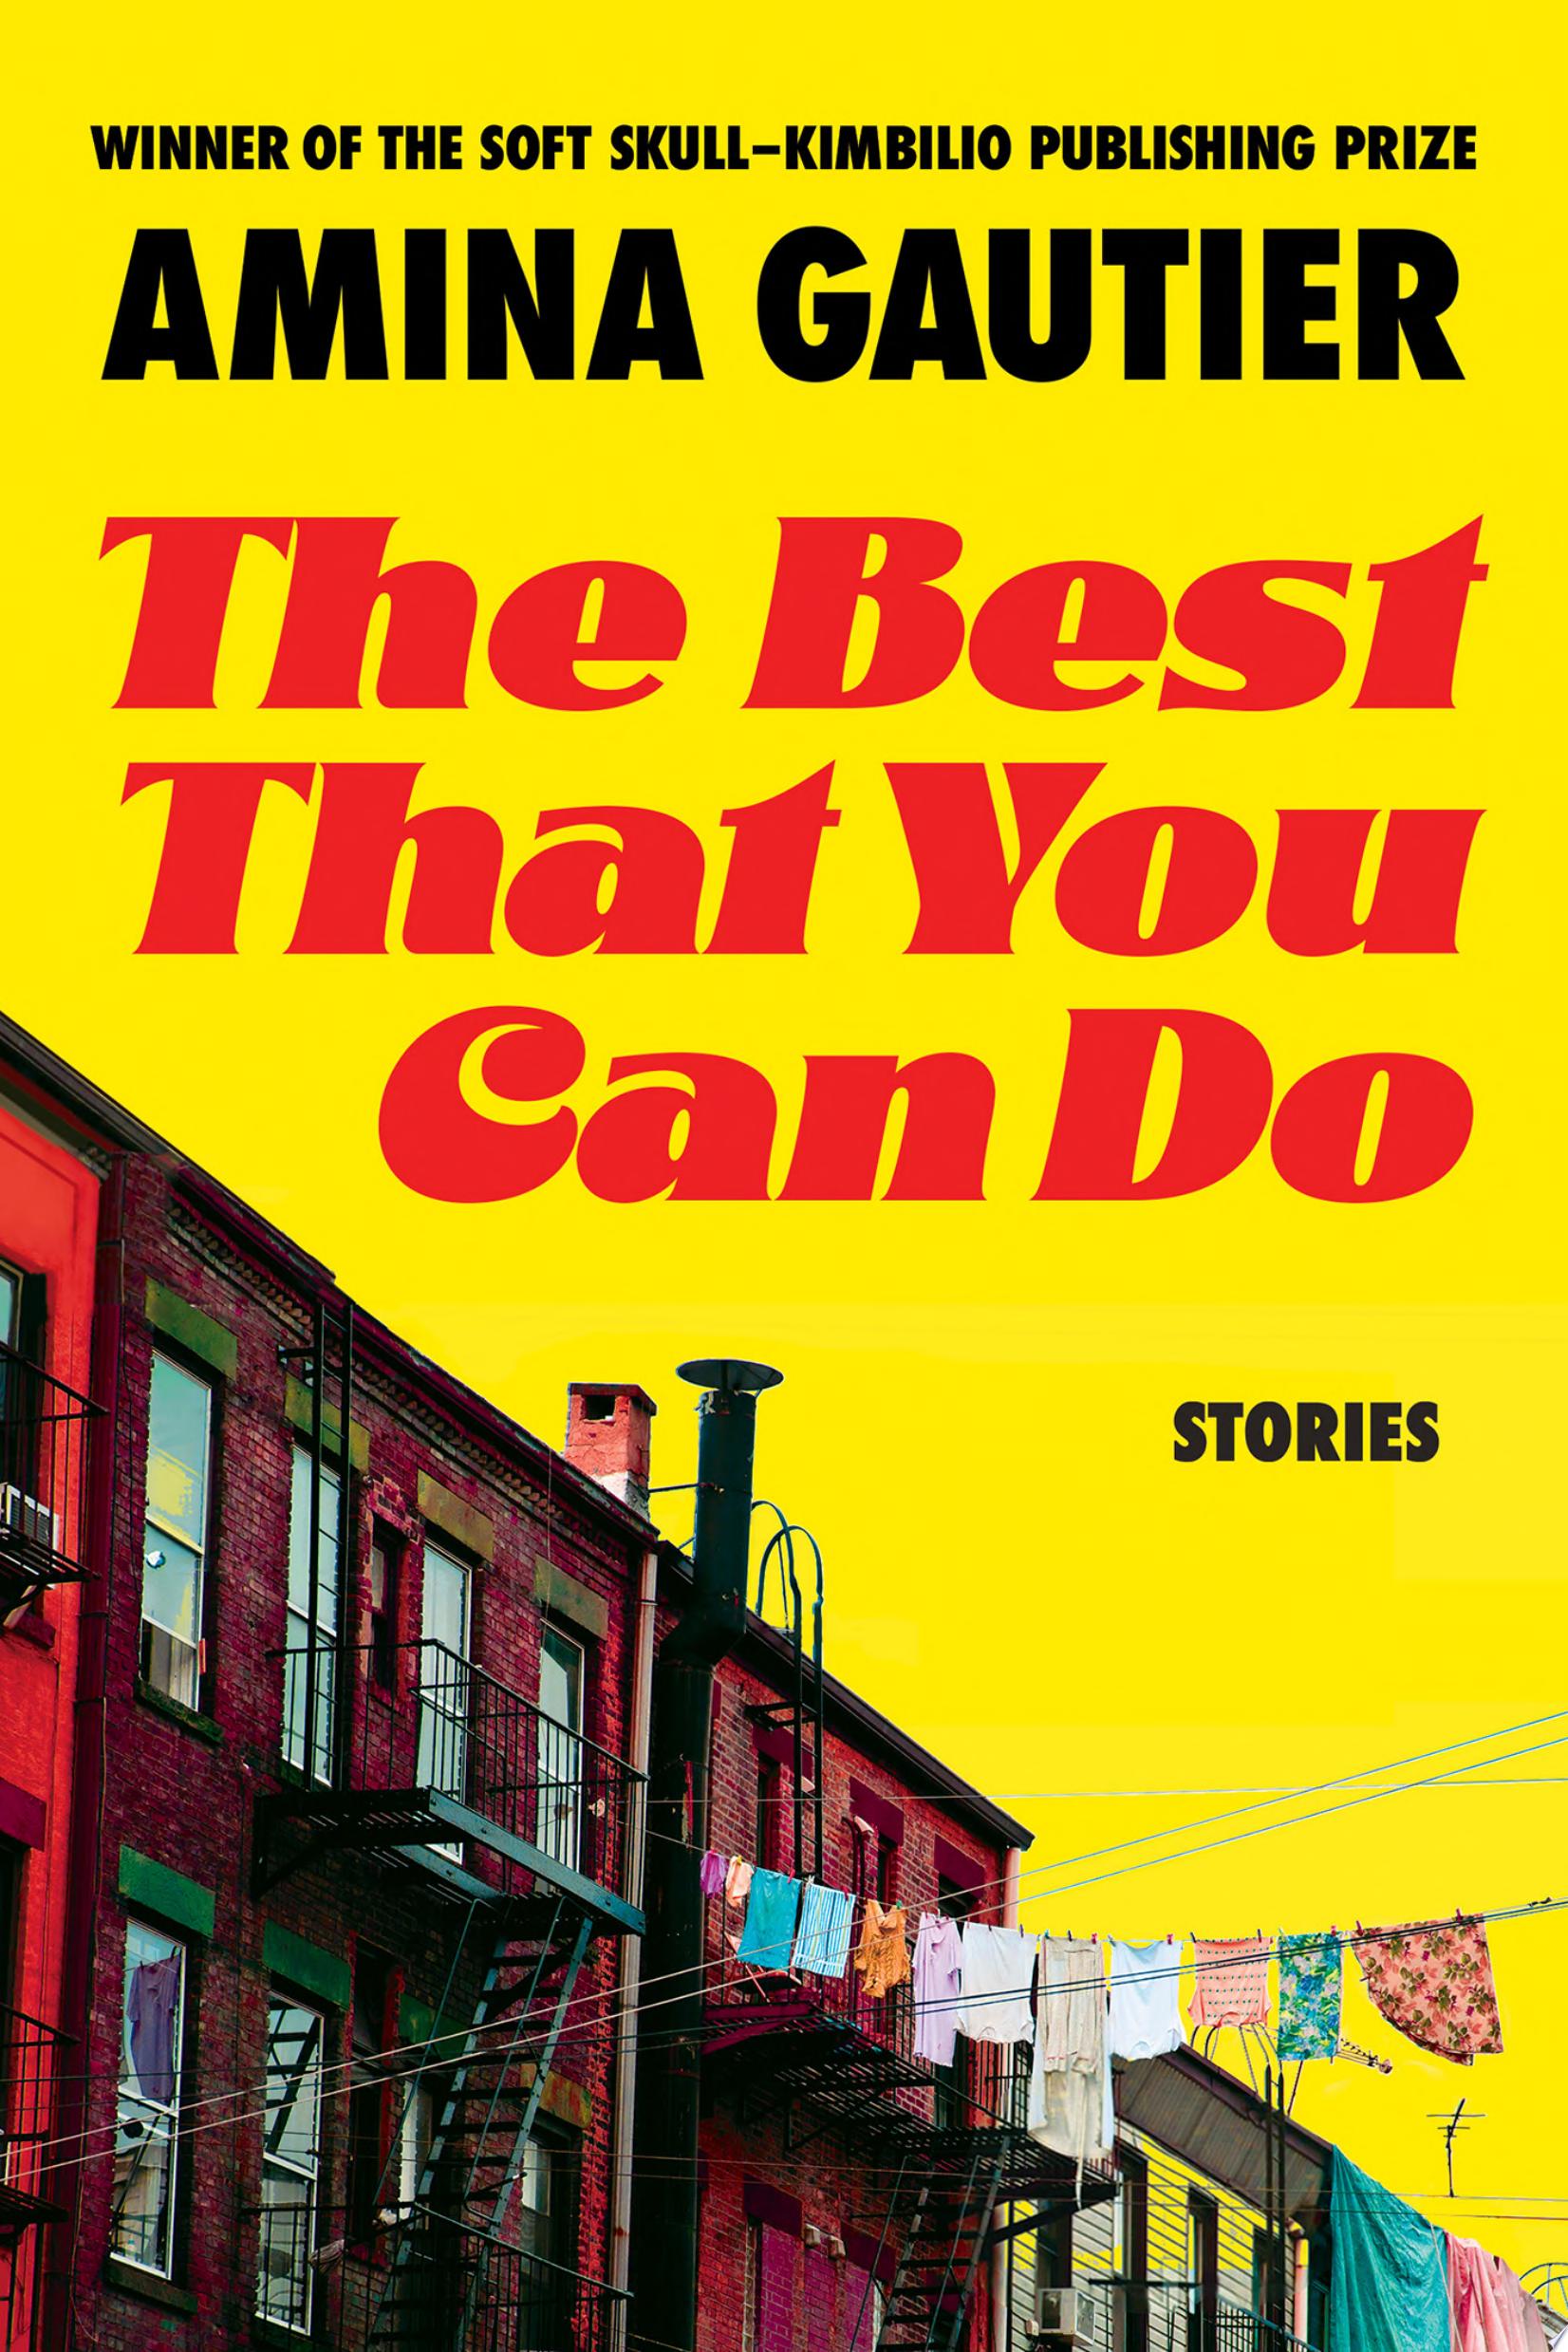 Image for "The Best That You Can Do"